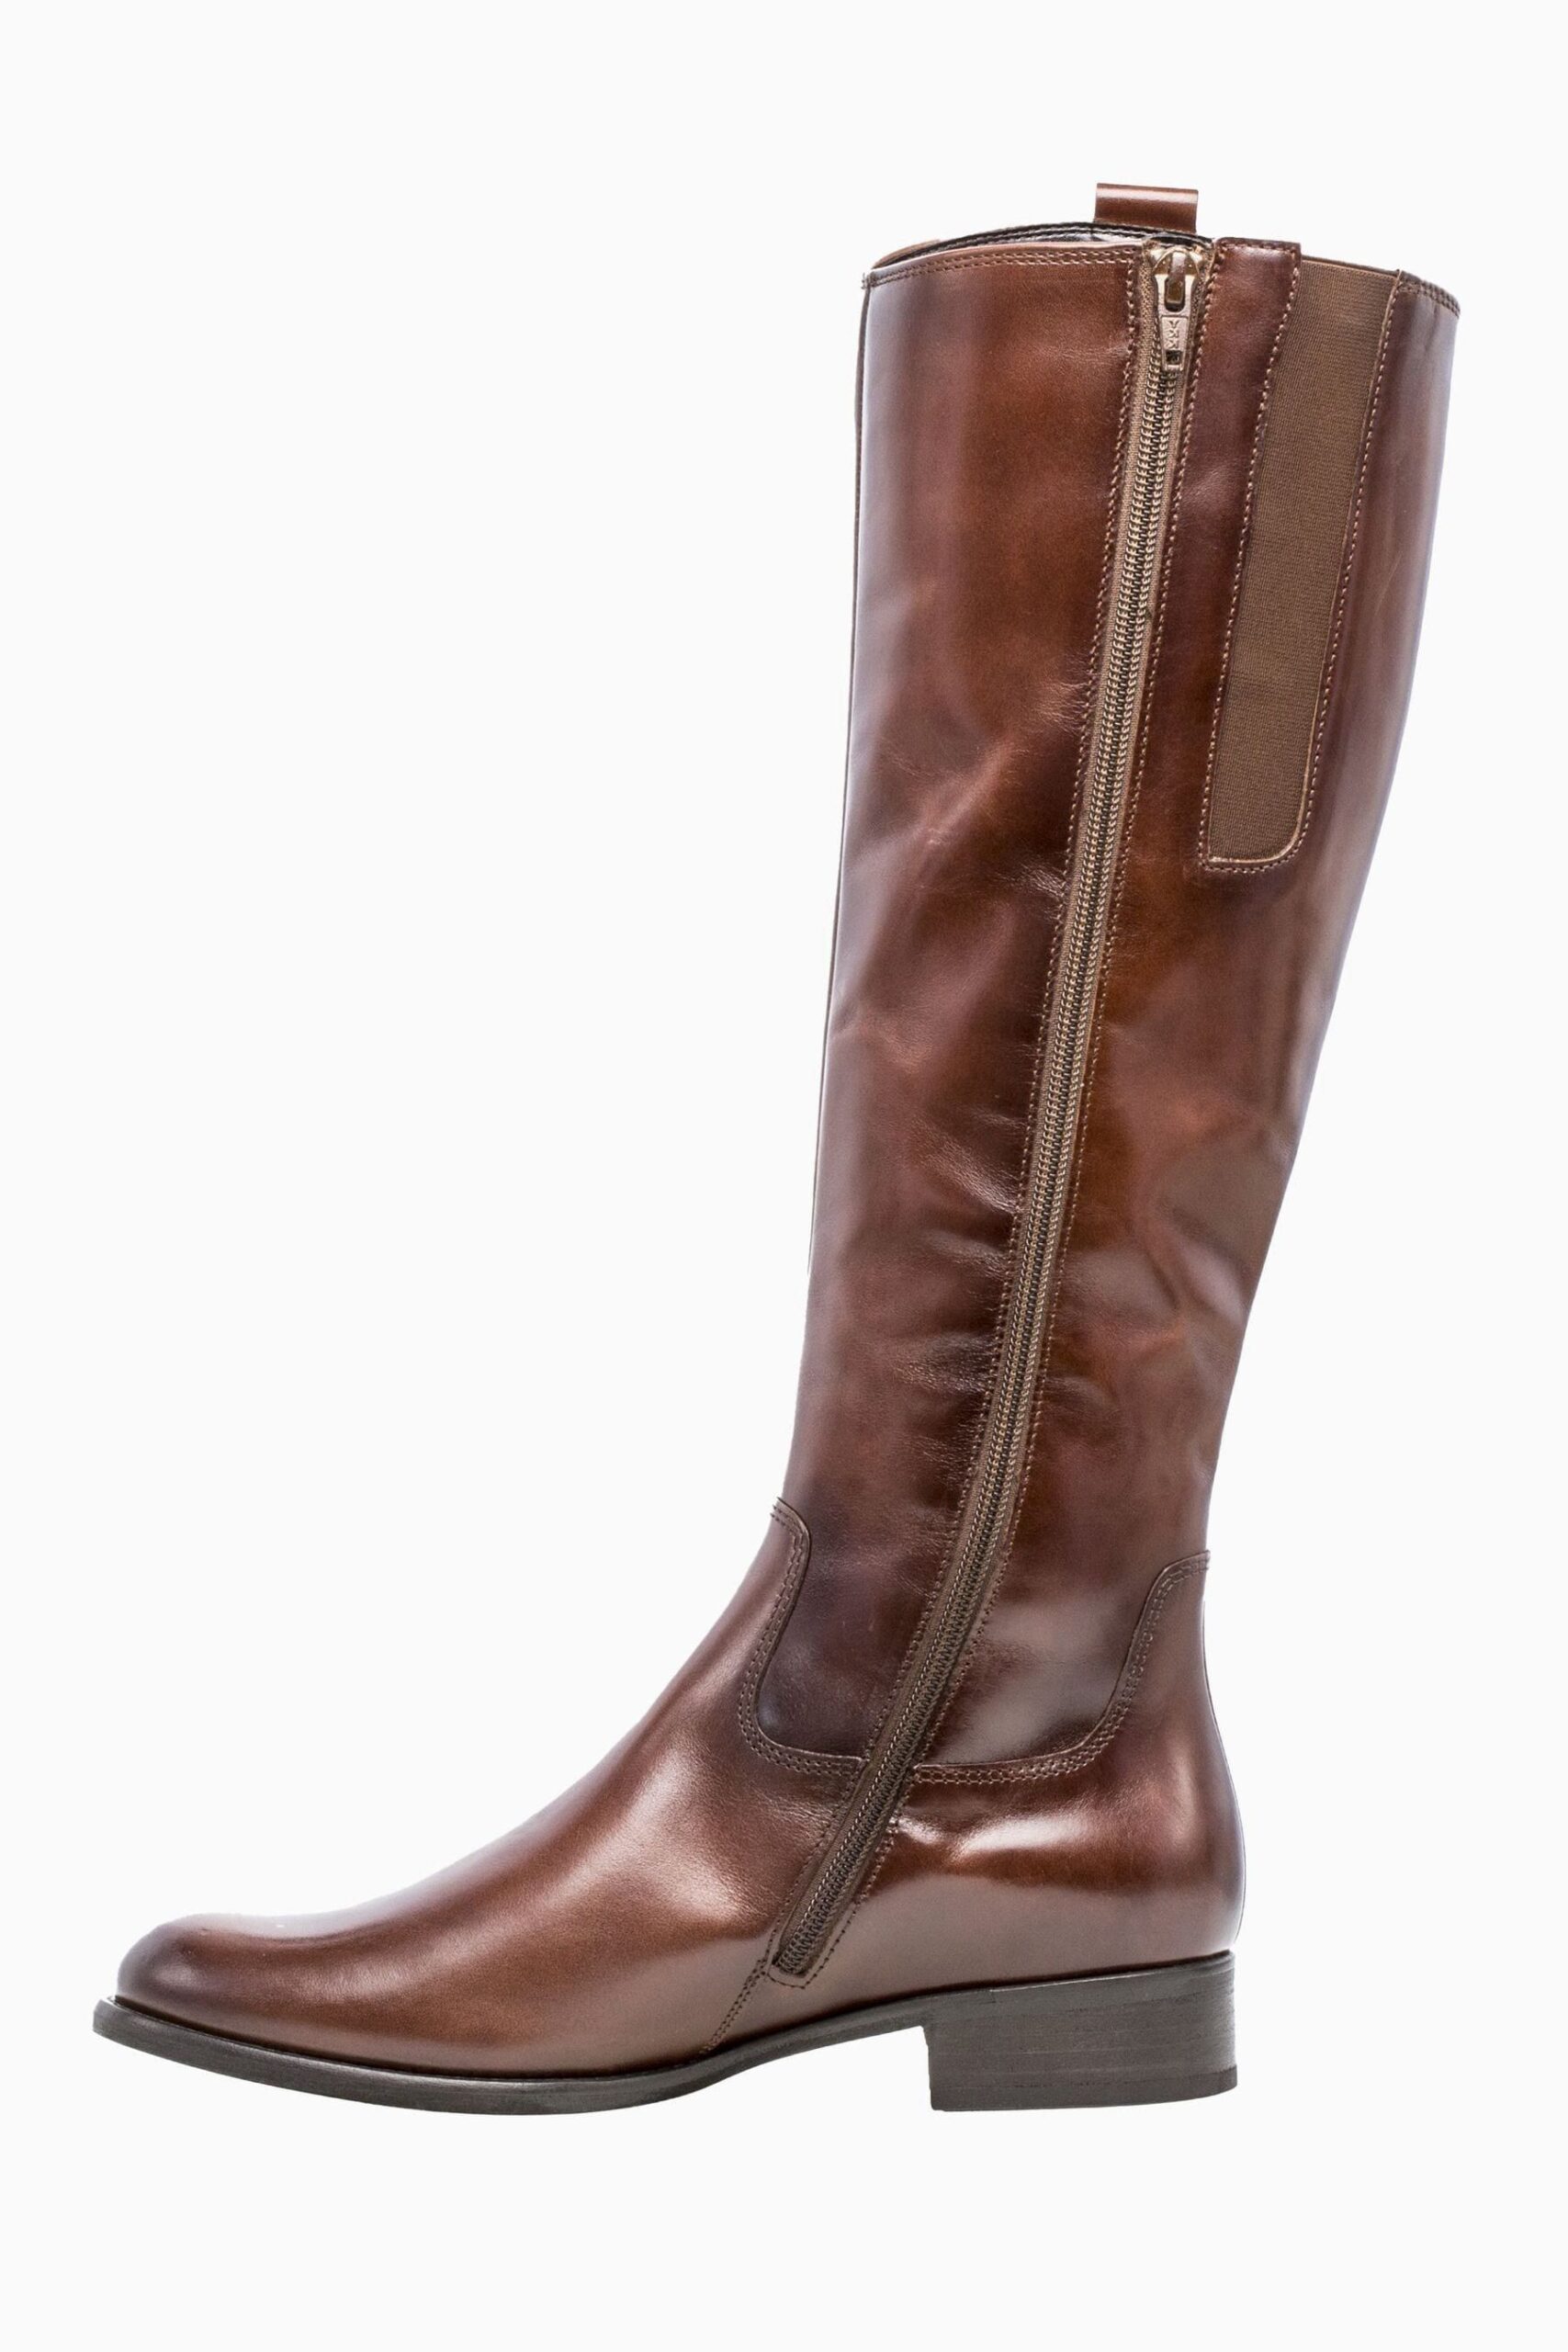 Gabor Boots For Extra Comfort And
Elegance